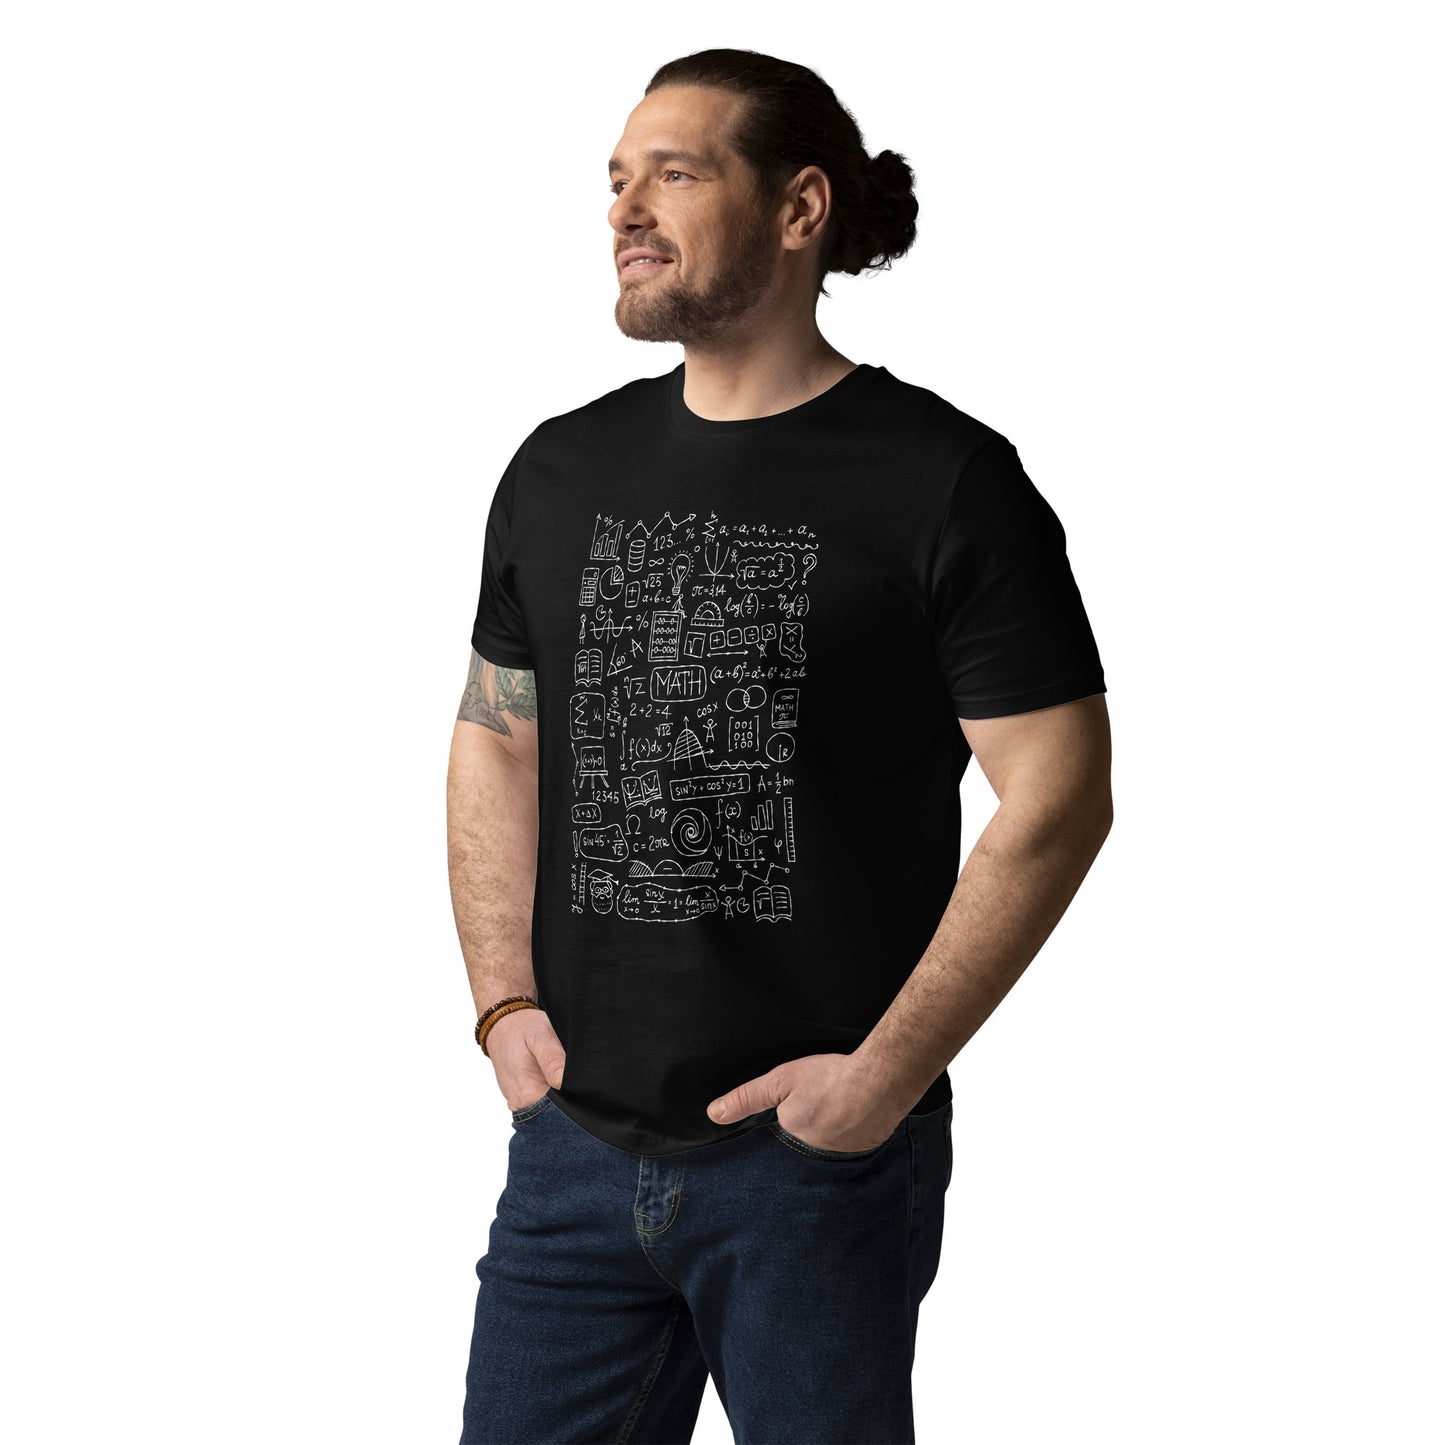 Man in Unisex black T-Shirt for Math Enthusiasts. with Hand-Drawn Math formulas and symbols